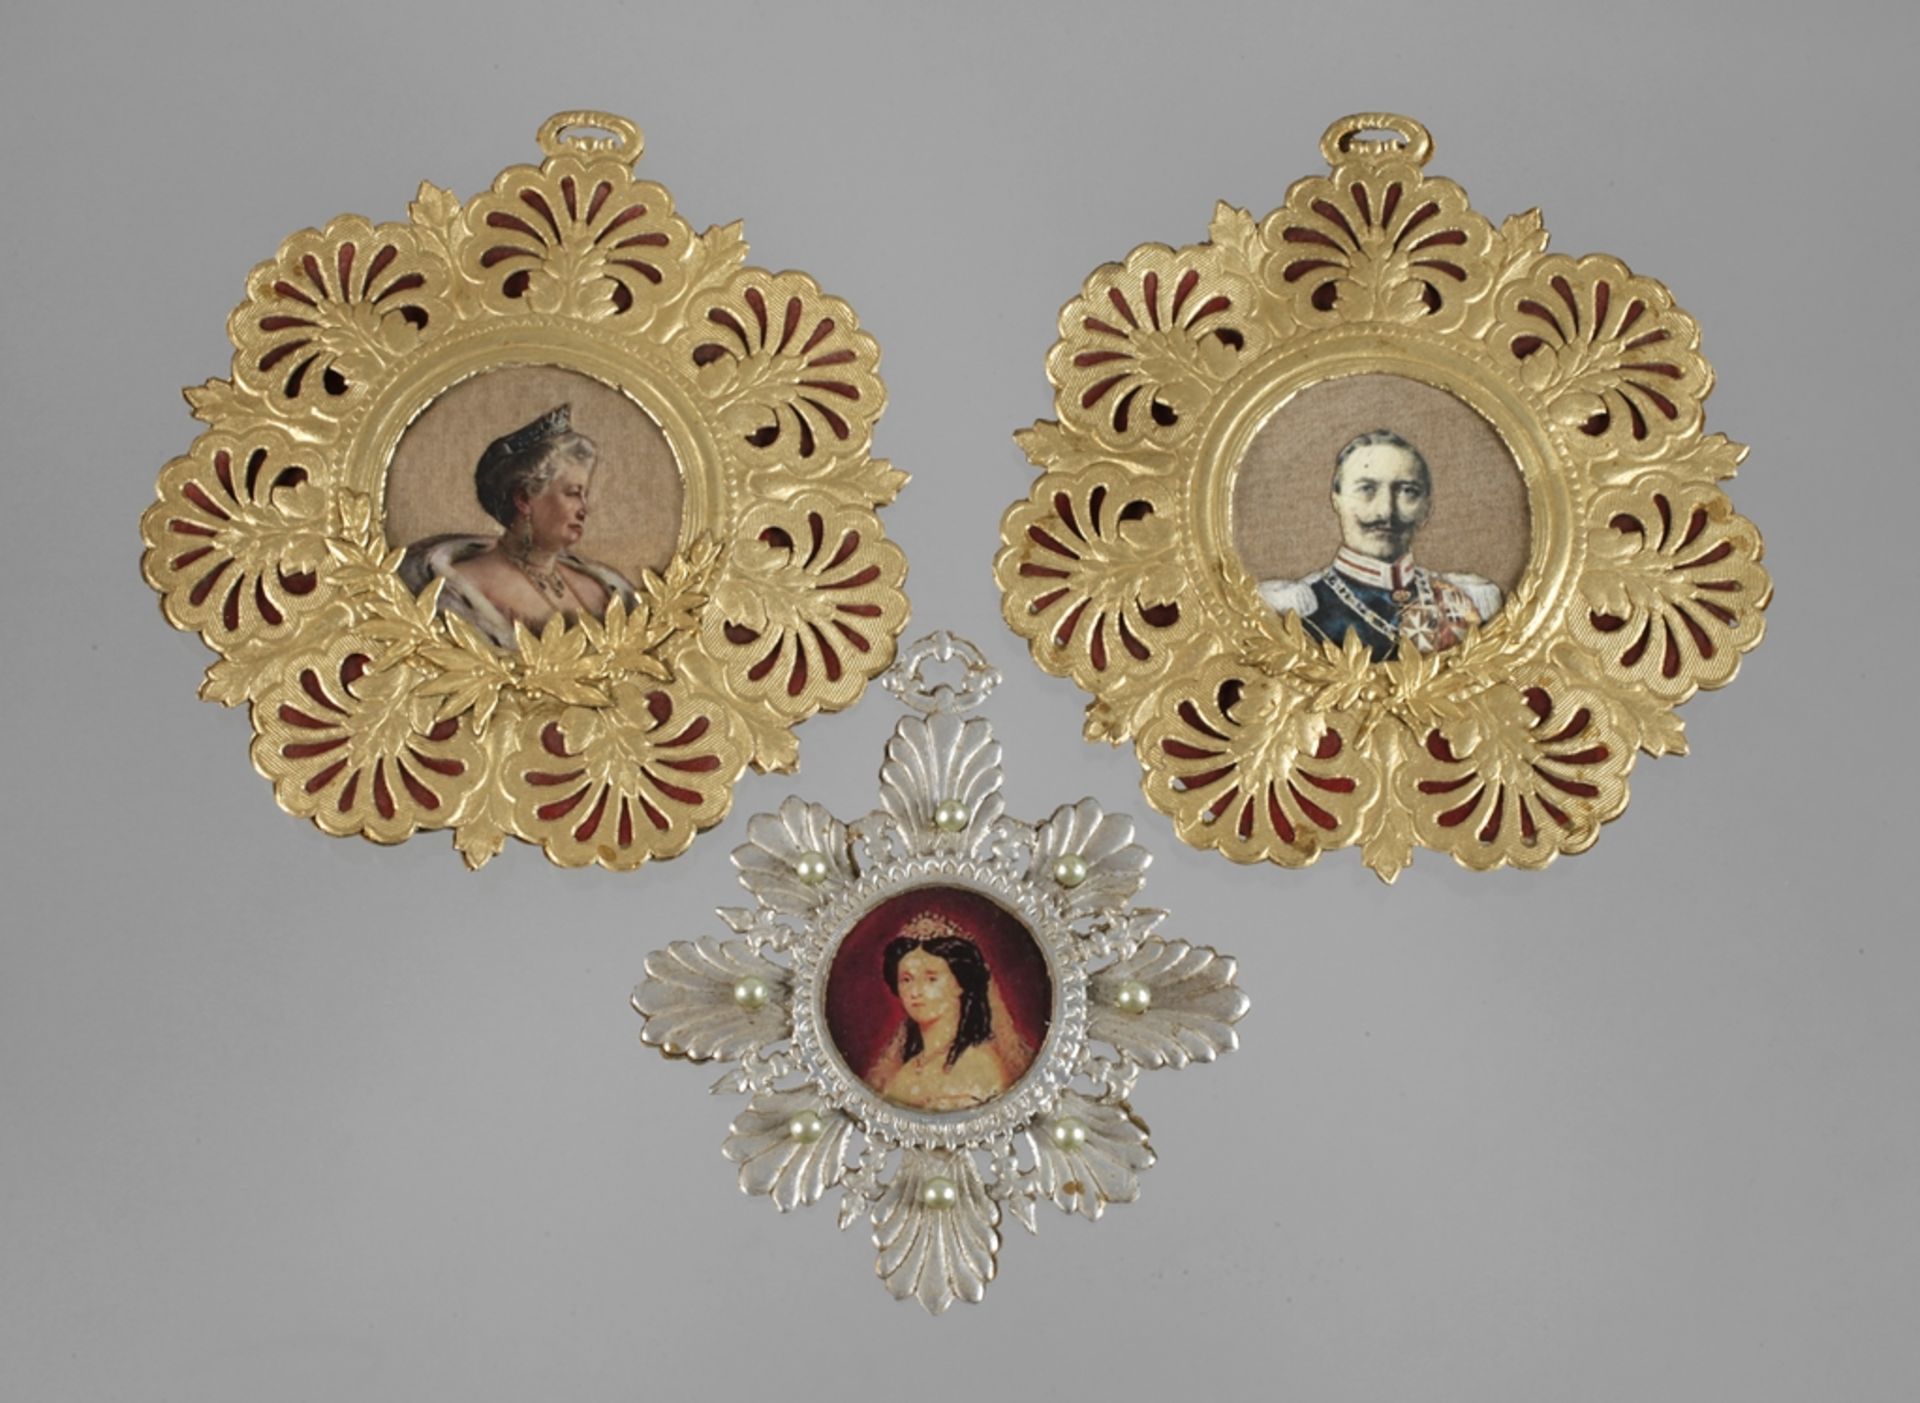 Patriotic Christmas tree decorations from the imperial era